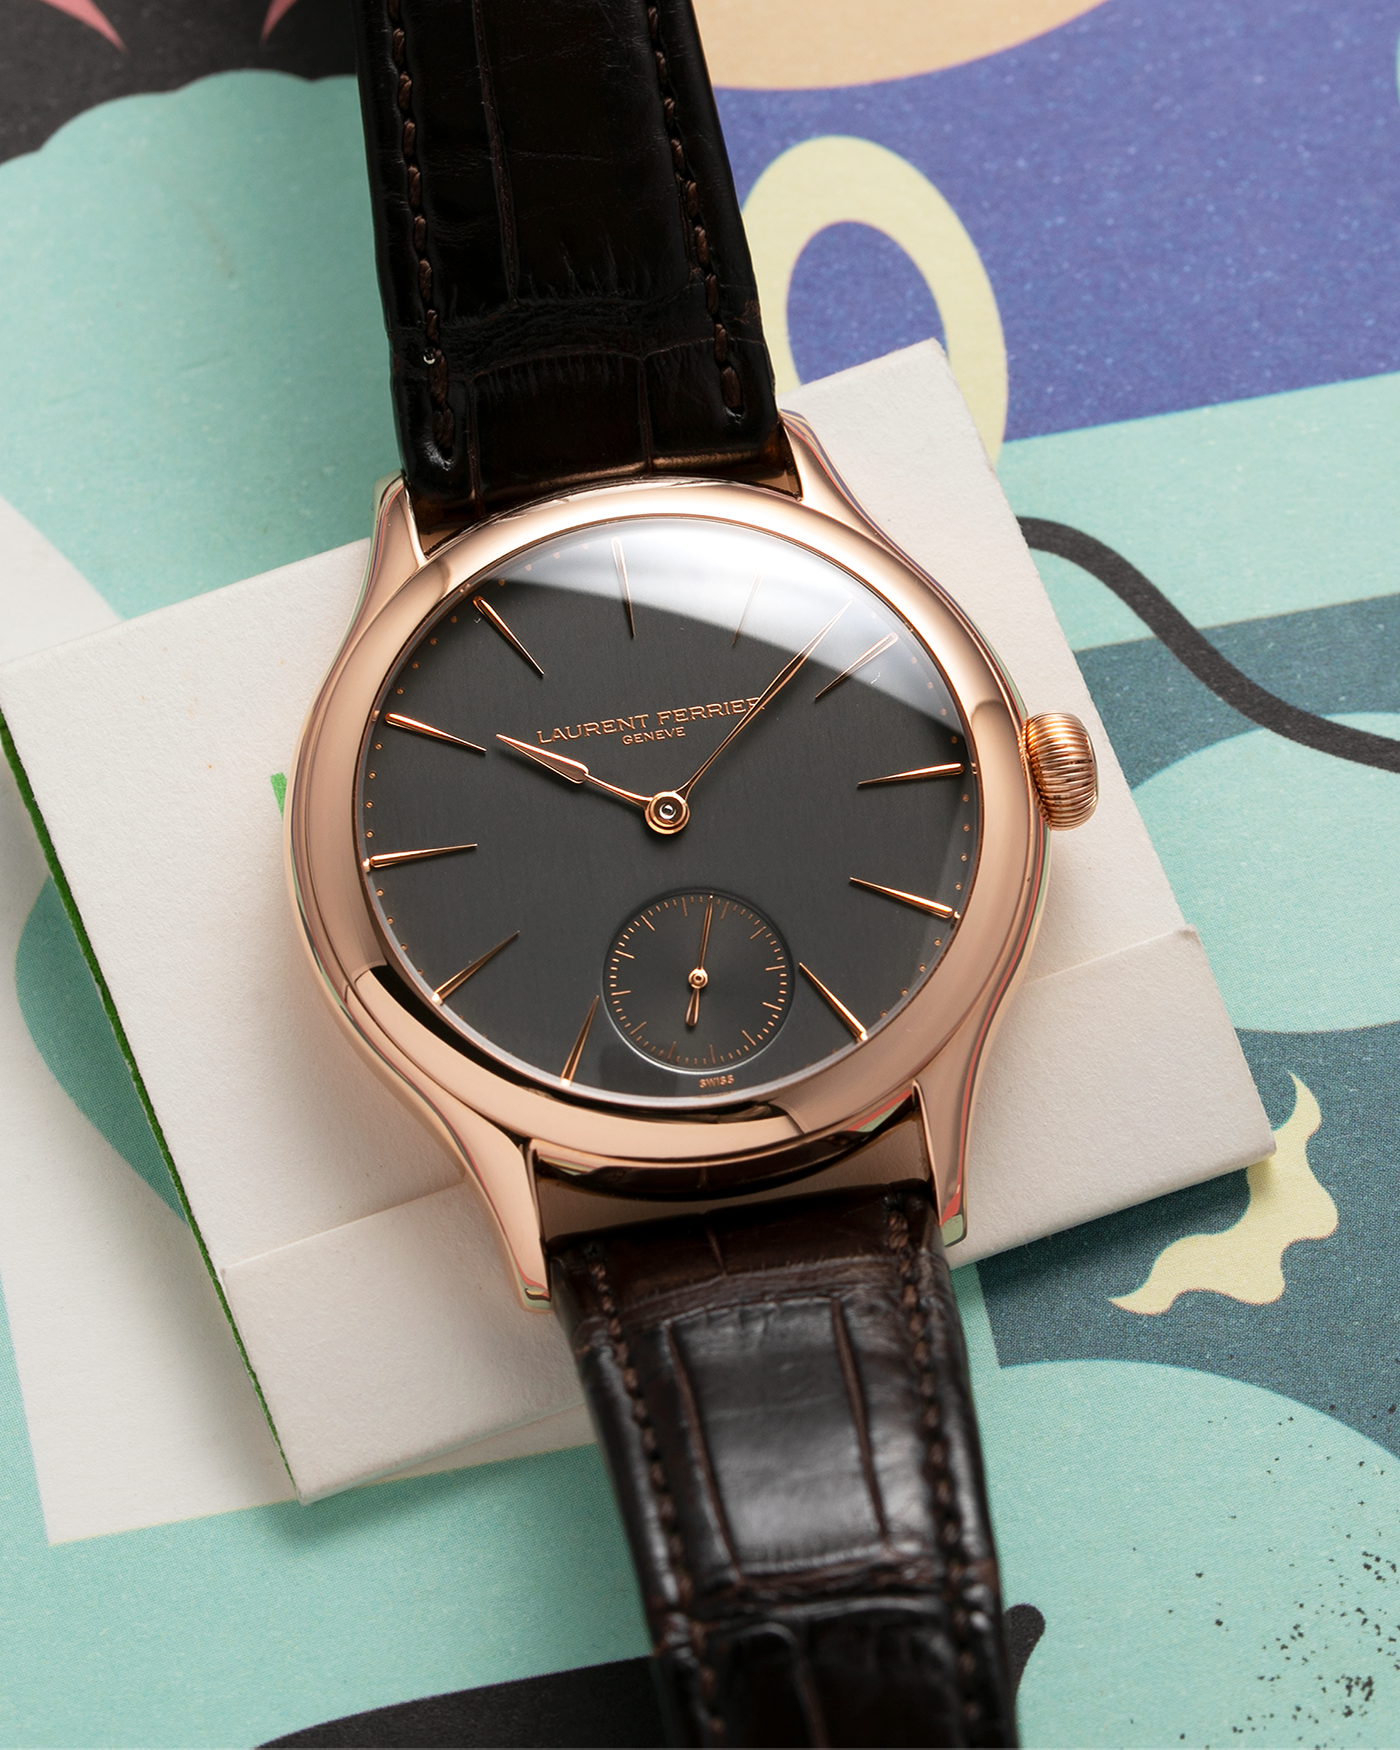 Brand: Laurent Ferrier Year: 2012 Model: Galet Classic Micro-Rotor Material: 18k Rose Gold Movement: Cal. 229.01 Micro-Rotor Case Diameter: 40mm Bracelet/Strap: Laurent Ferrier Brown Alligator Leather Strap with Laurent Ferrier 18k Rose Gold Tang Buckle